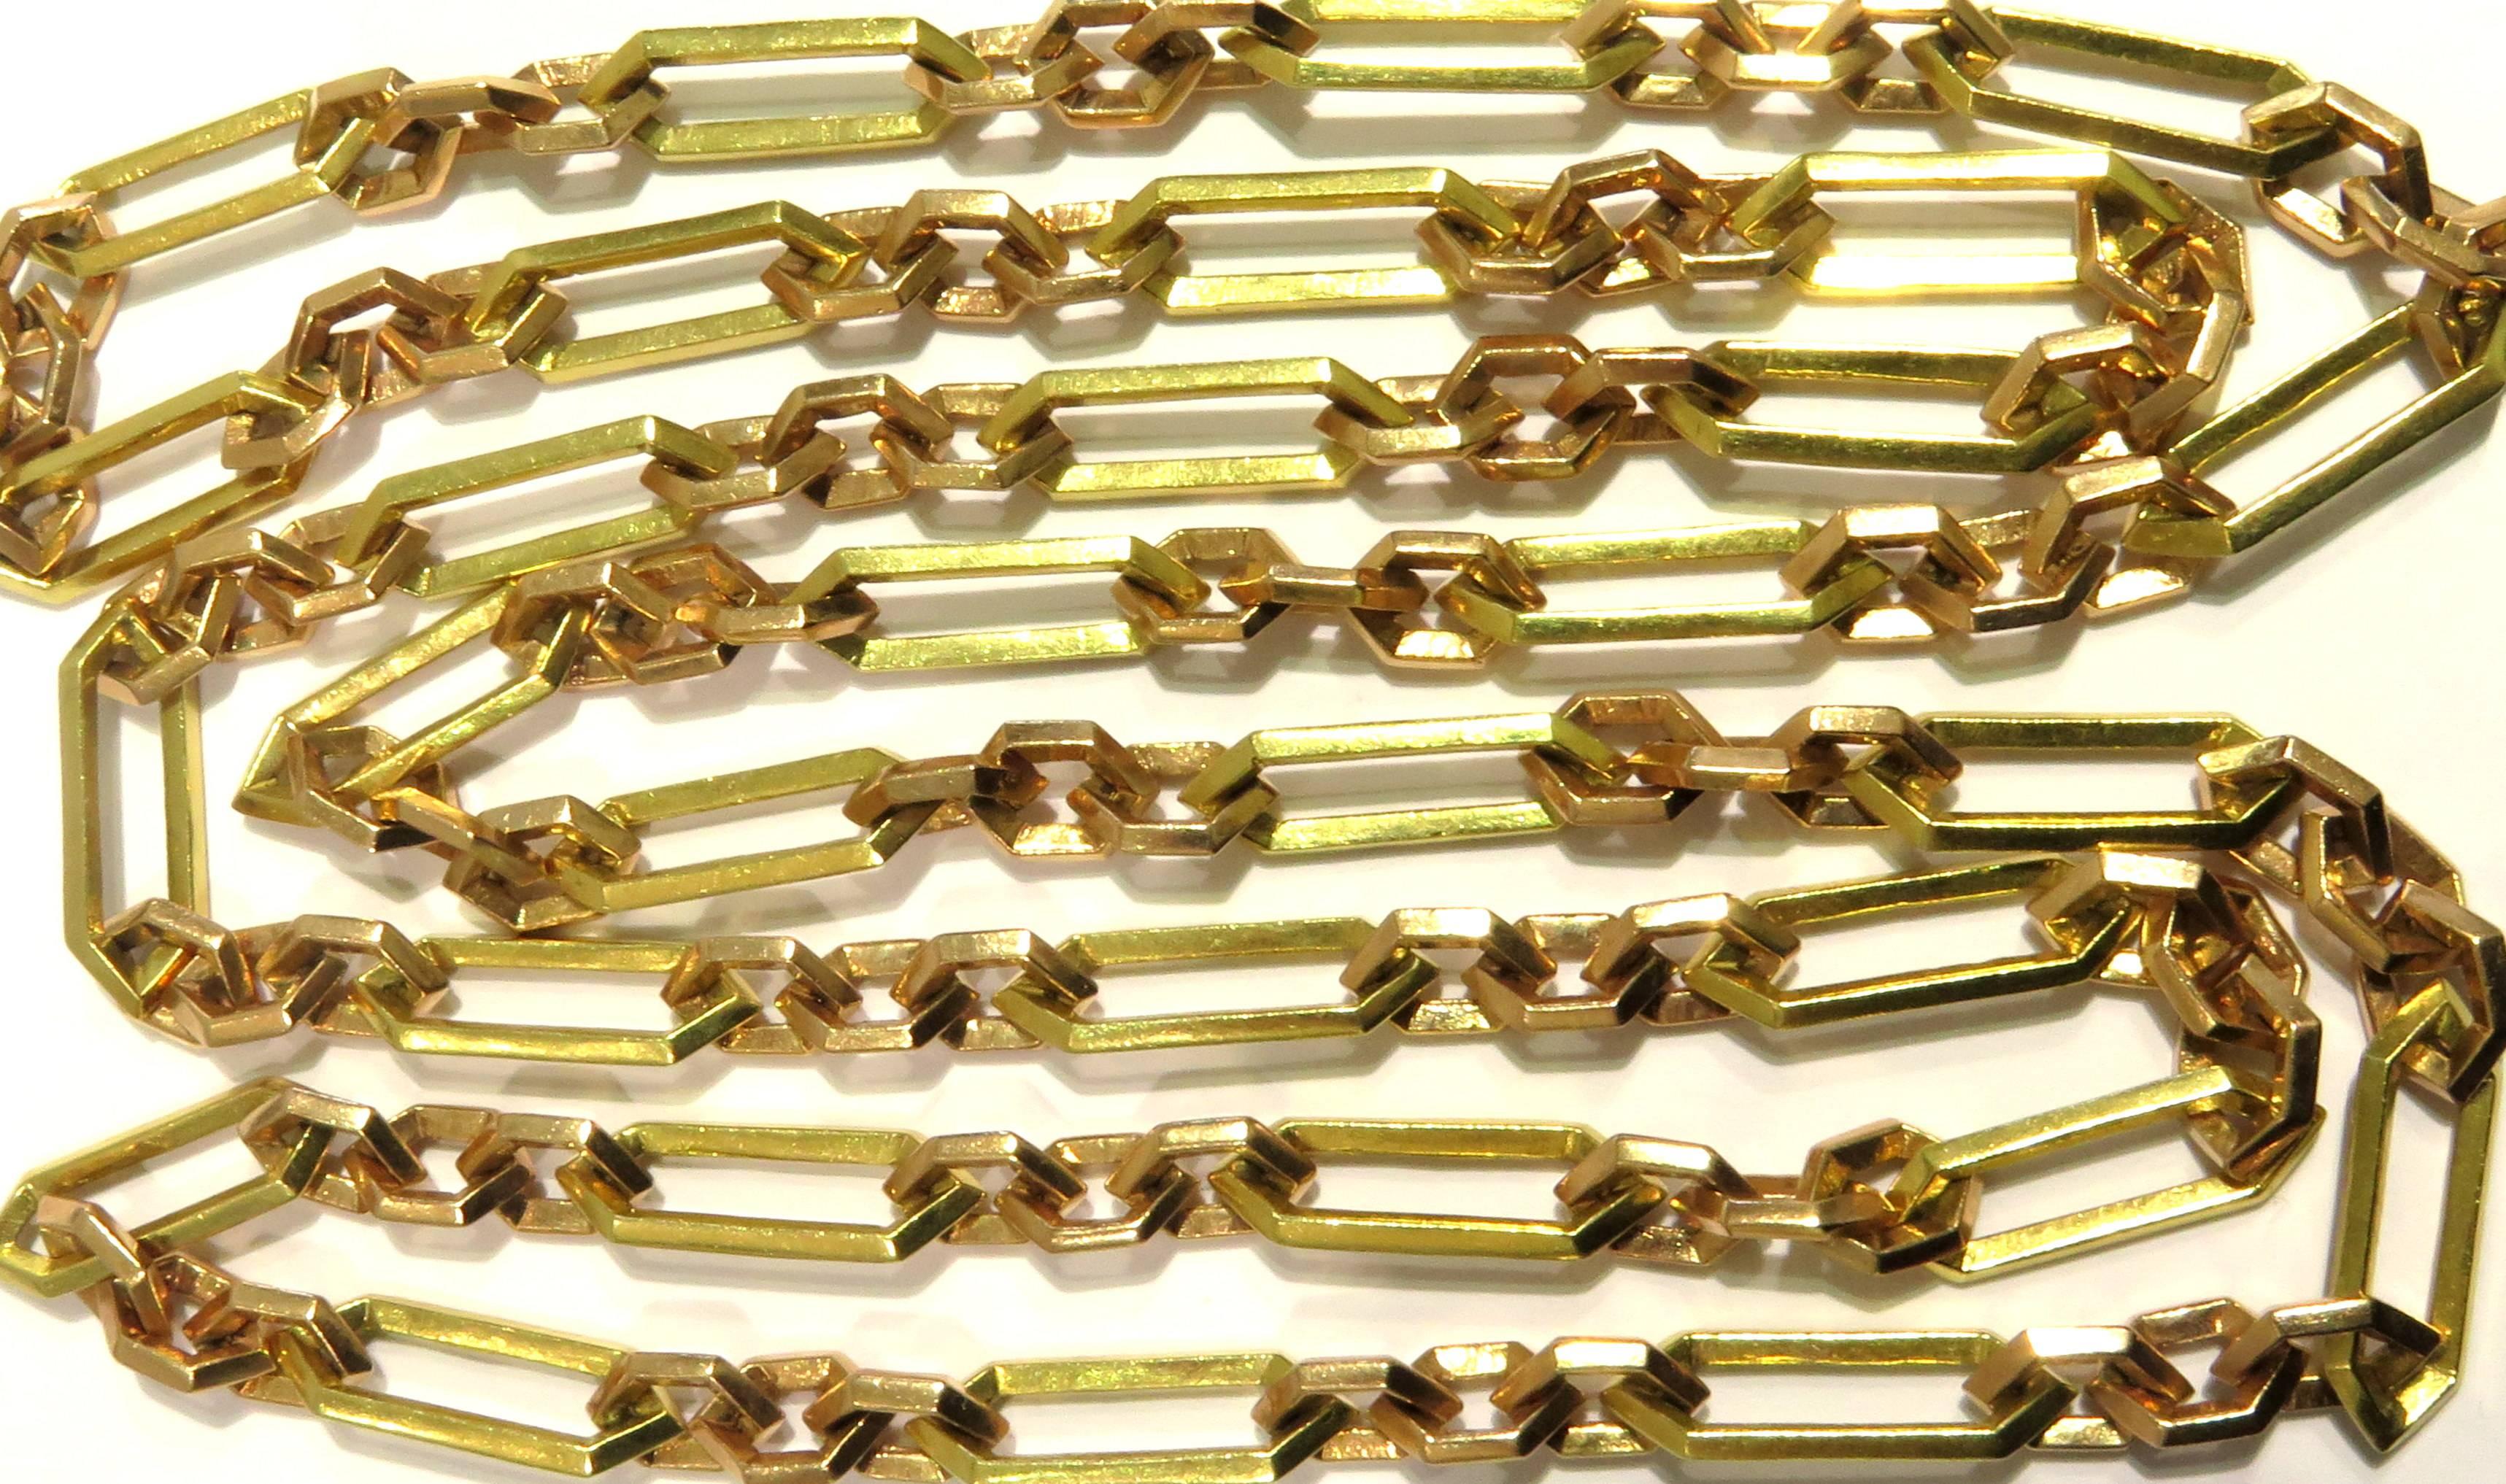 This amazing retro rose & yellow gold chain is a functional work of art! Each of the yellow gold links are solid 18k gold. Each of the rose gold links are solid 14k gold.
This fabulous link necklace was made without a clasp, but it would be very